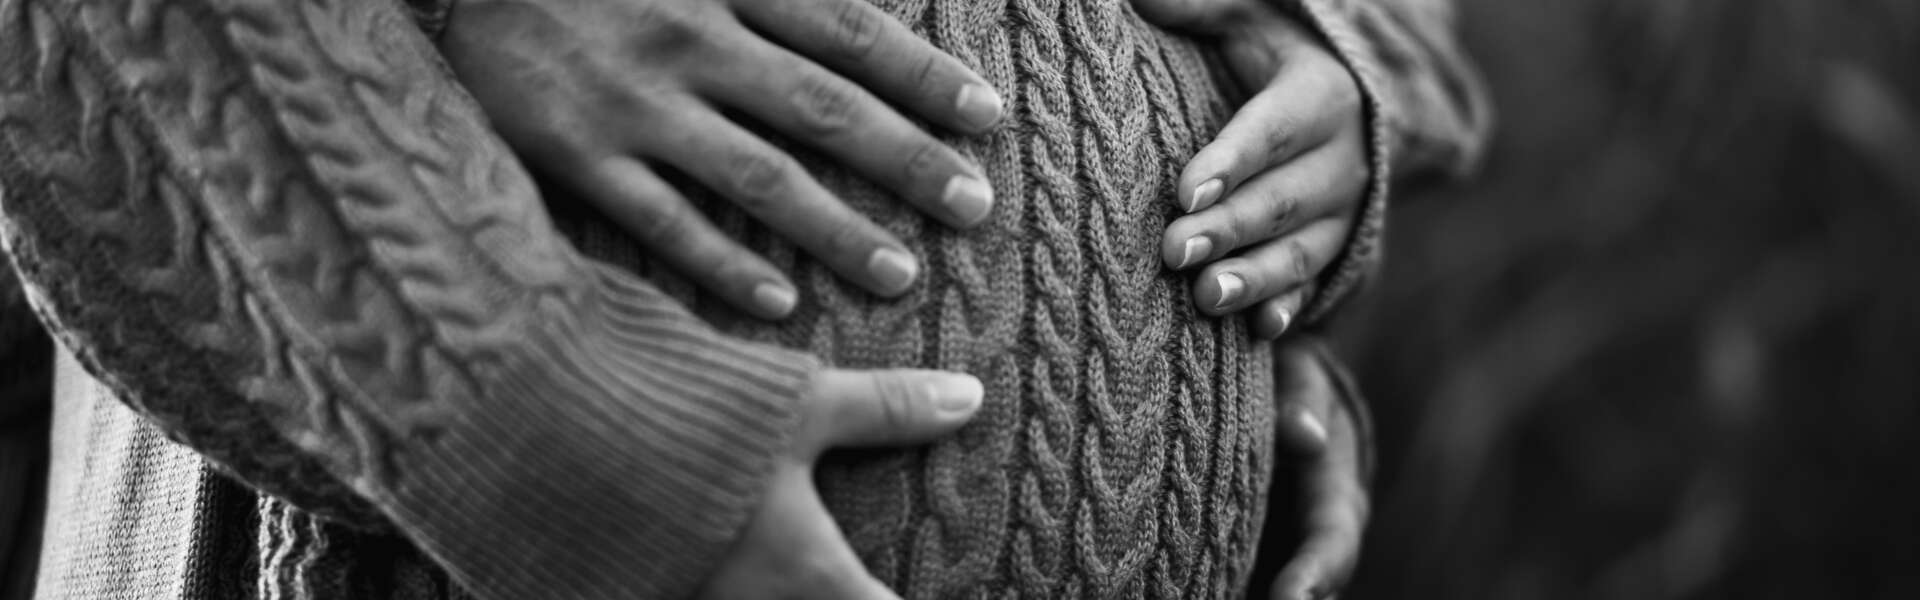 A black and white photo of a person's pregnant belly is cupped by their and their partners hands. The pregnant person is wearing a cable knit dress.